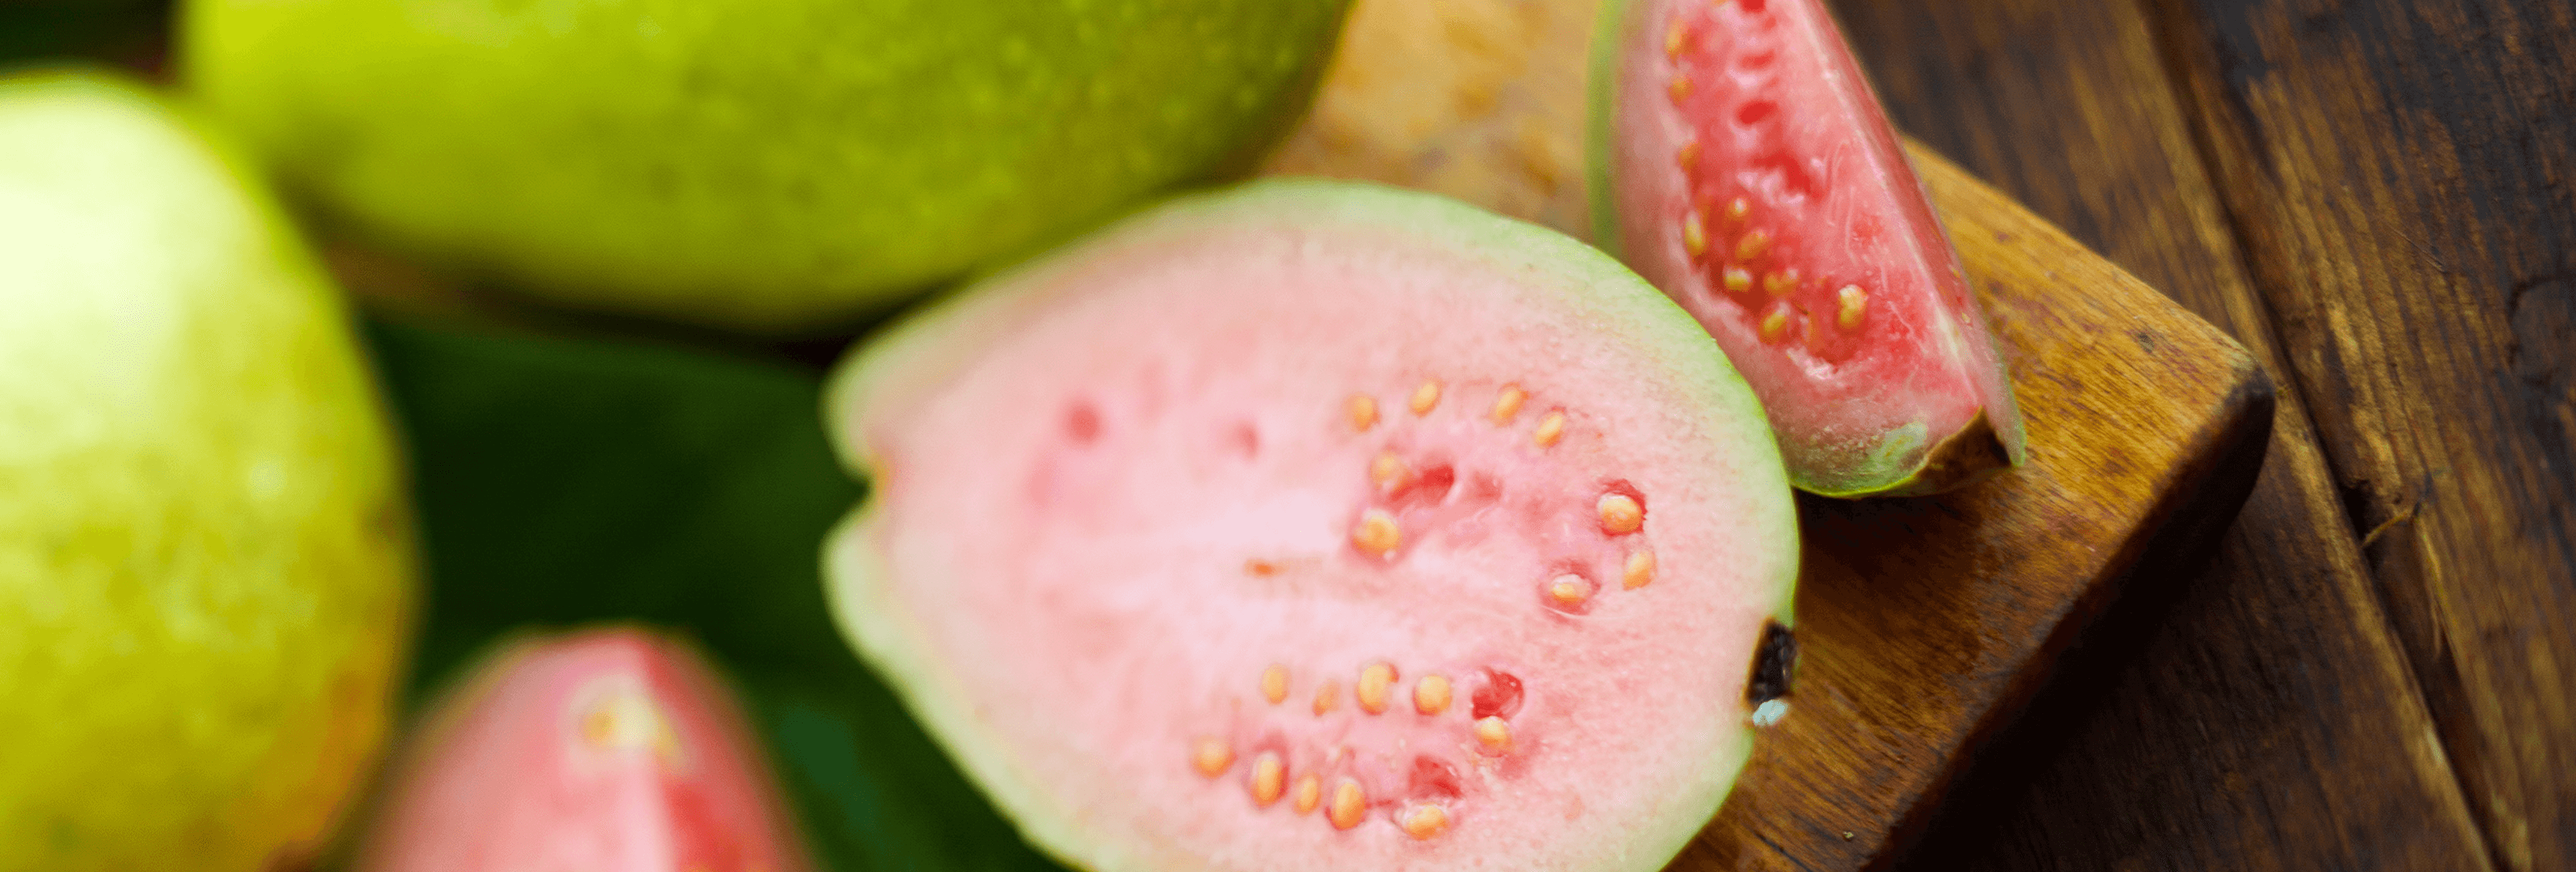 Guava Seeds - To Eat or to Spit?